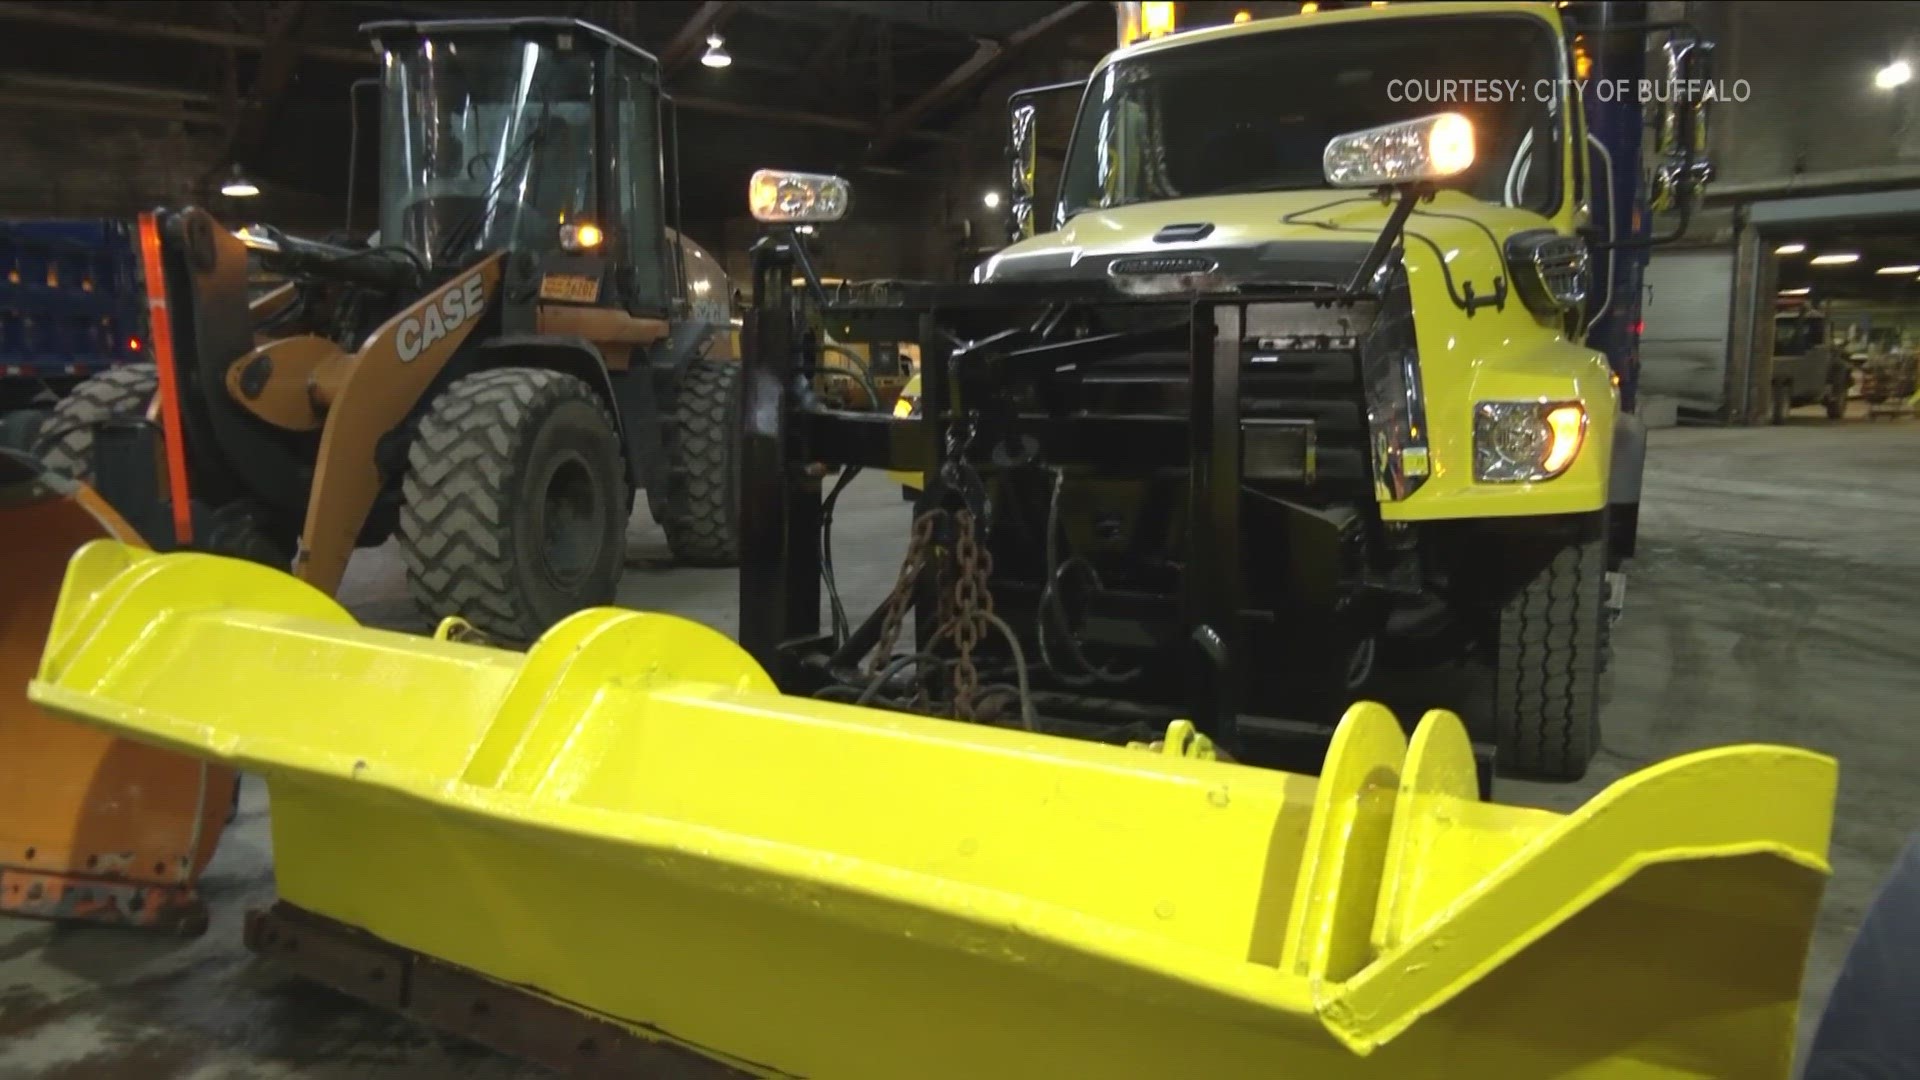 While the Thruway Authority still owns the snow plows, the City of Buffalo is responsible for normal operation of the plows, routine maintenance, and also repairs.